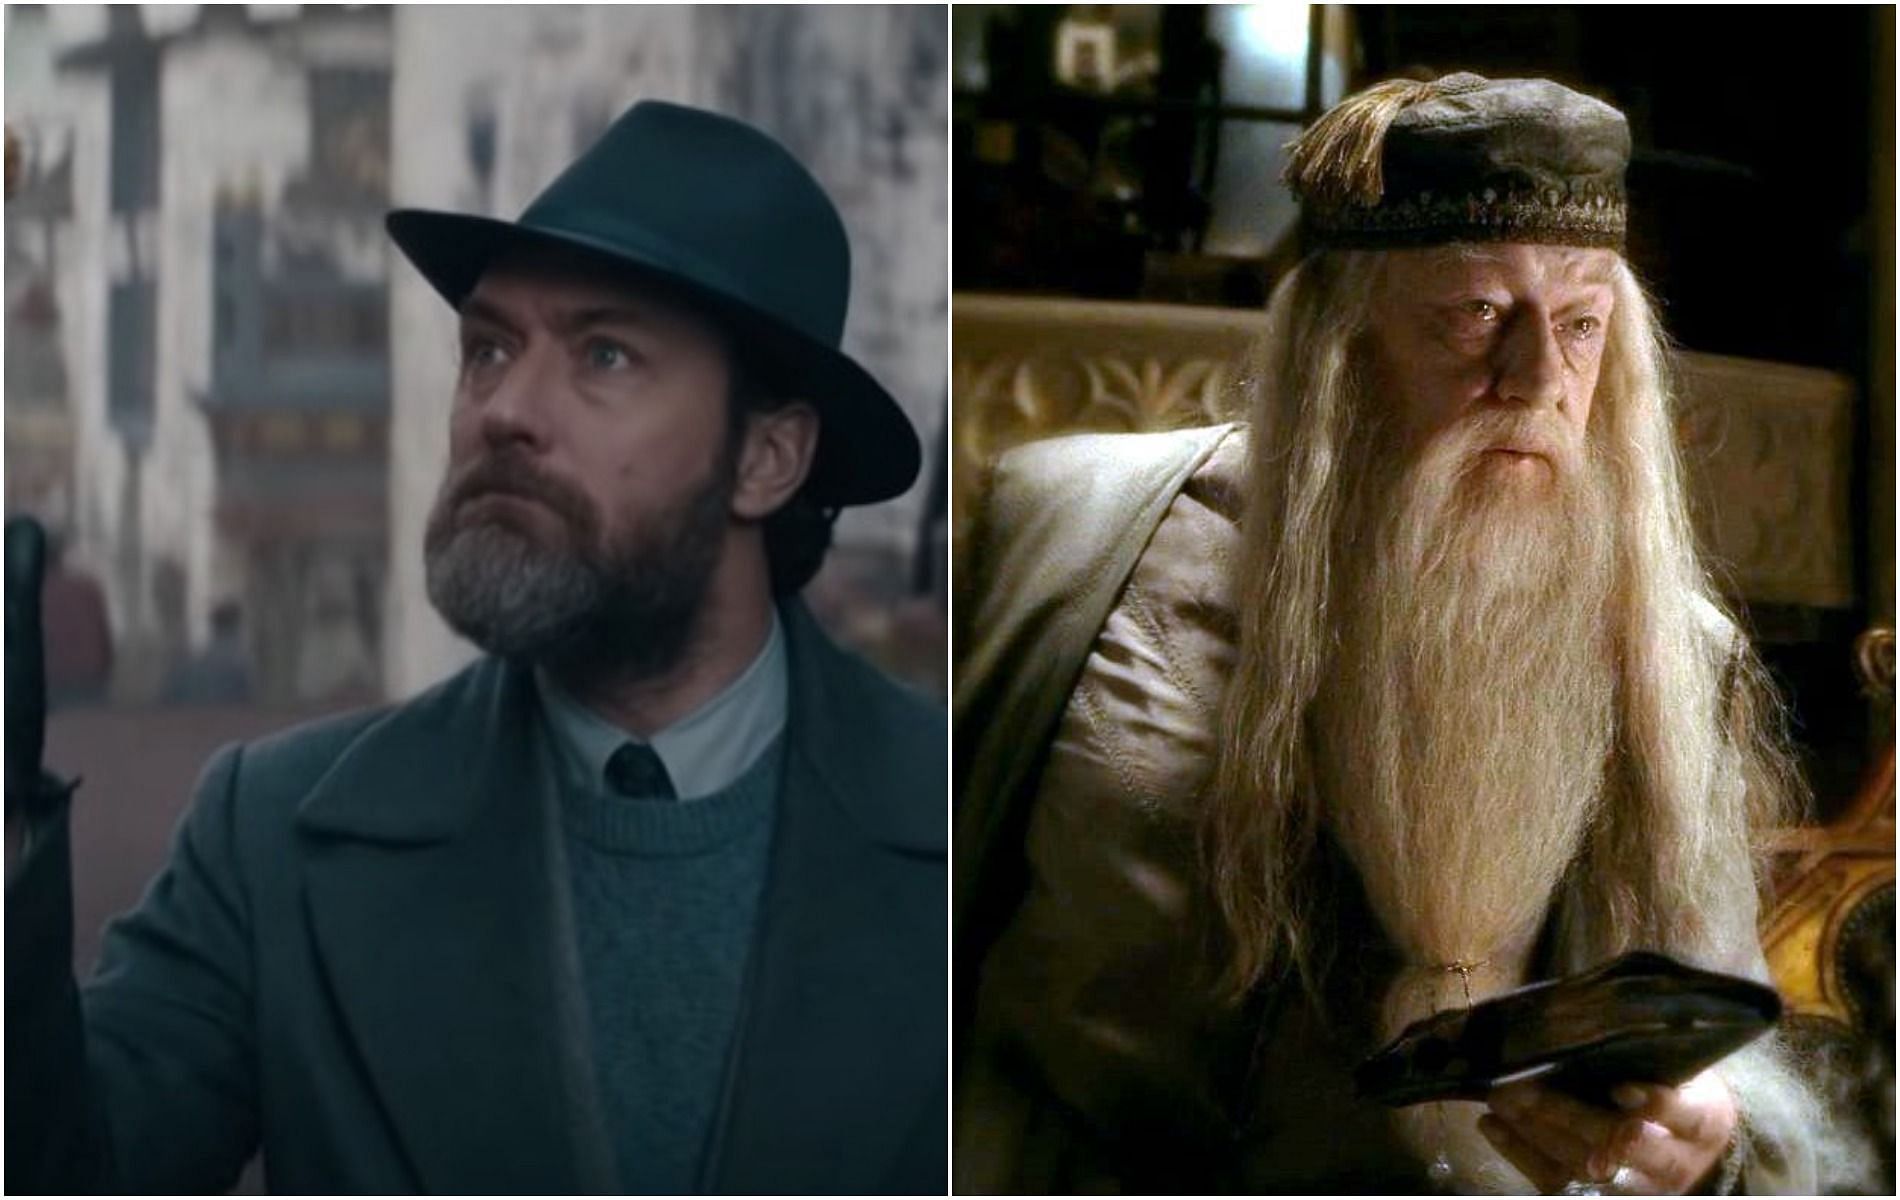 Dumbledore as portrayed by Jude Law (Fantastic Beasts) and Michael Gambon (Harry Potter) (Image by Secrets of the Dumbledore and Half-Blood Prince)